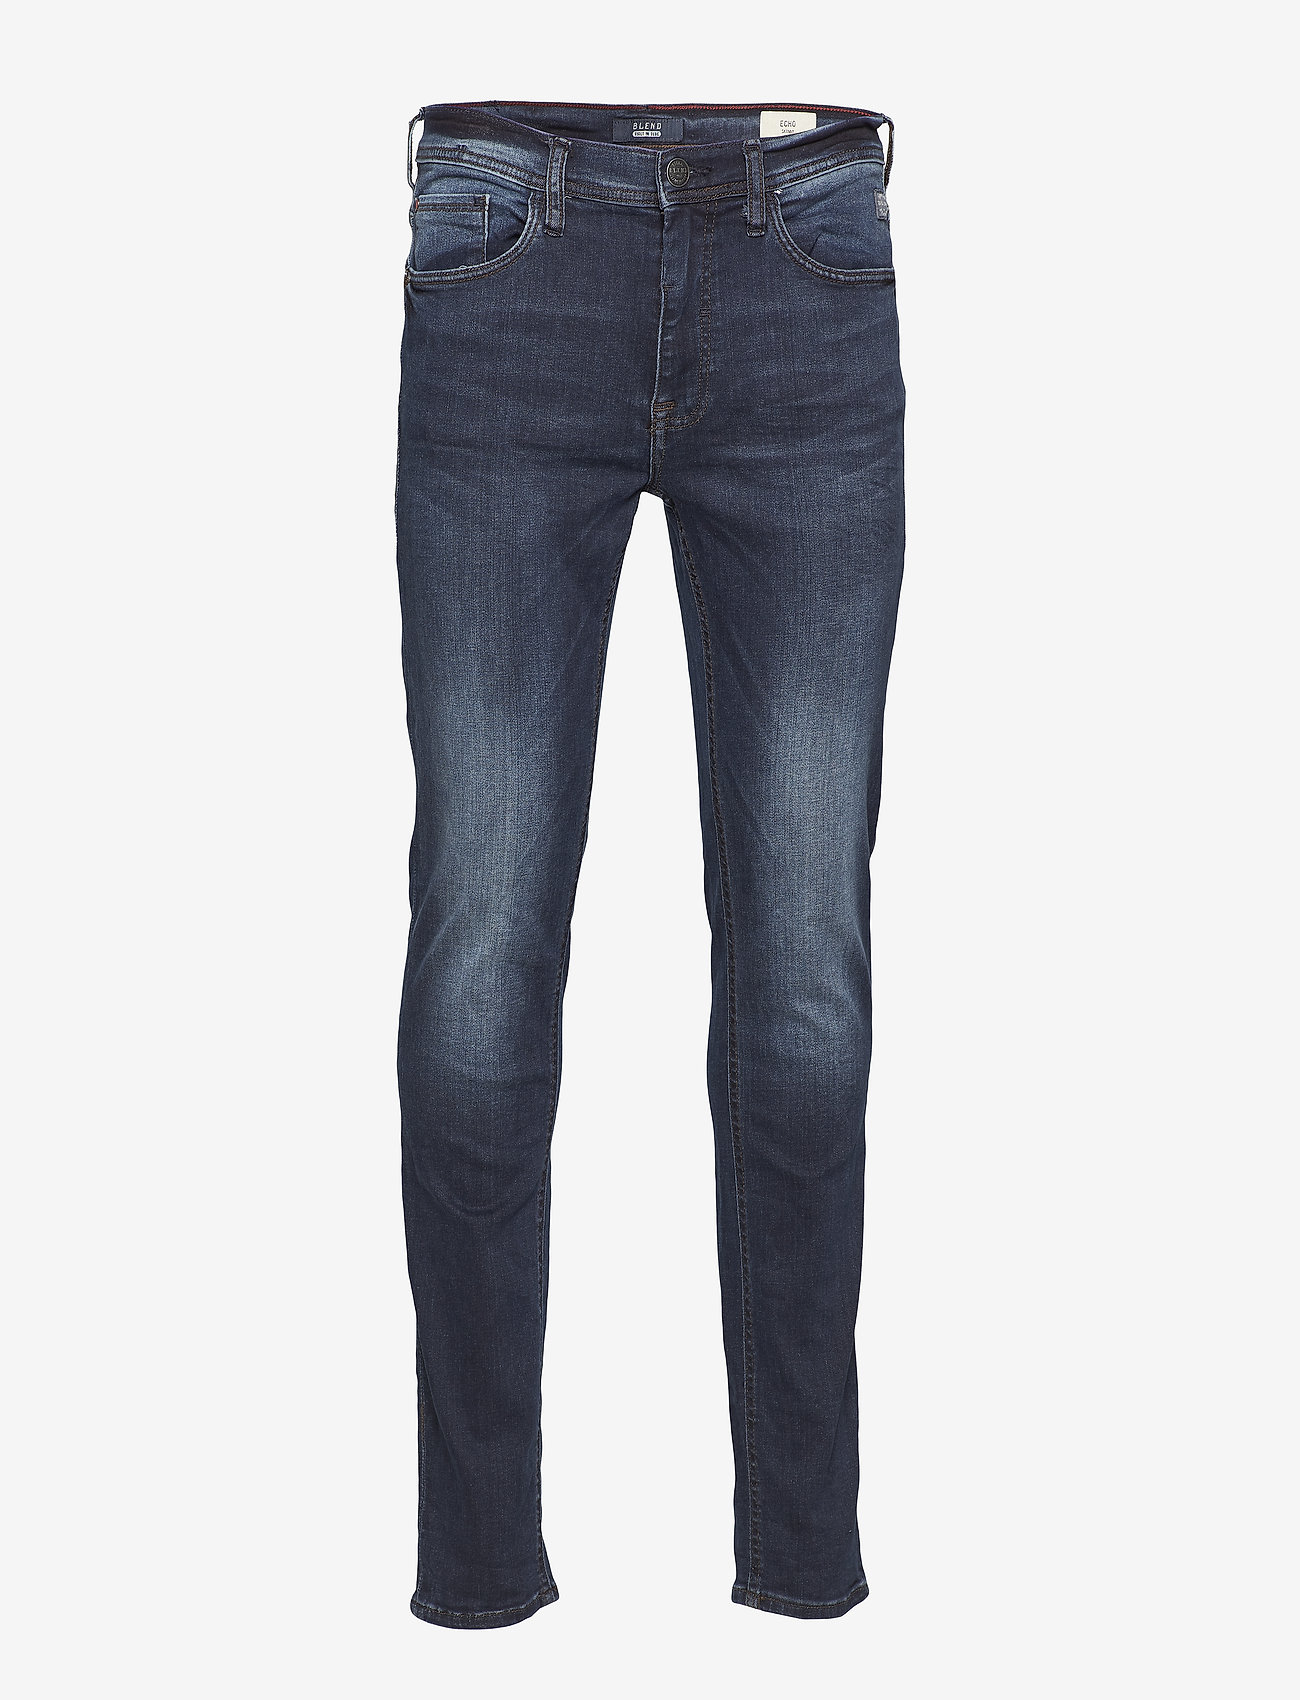 Blend Echo Fit - Noos Jeans - Skinny jeans | Boozt.com